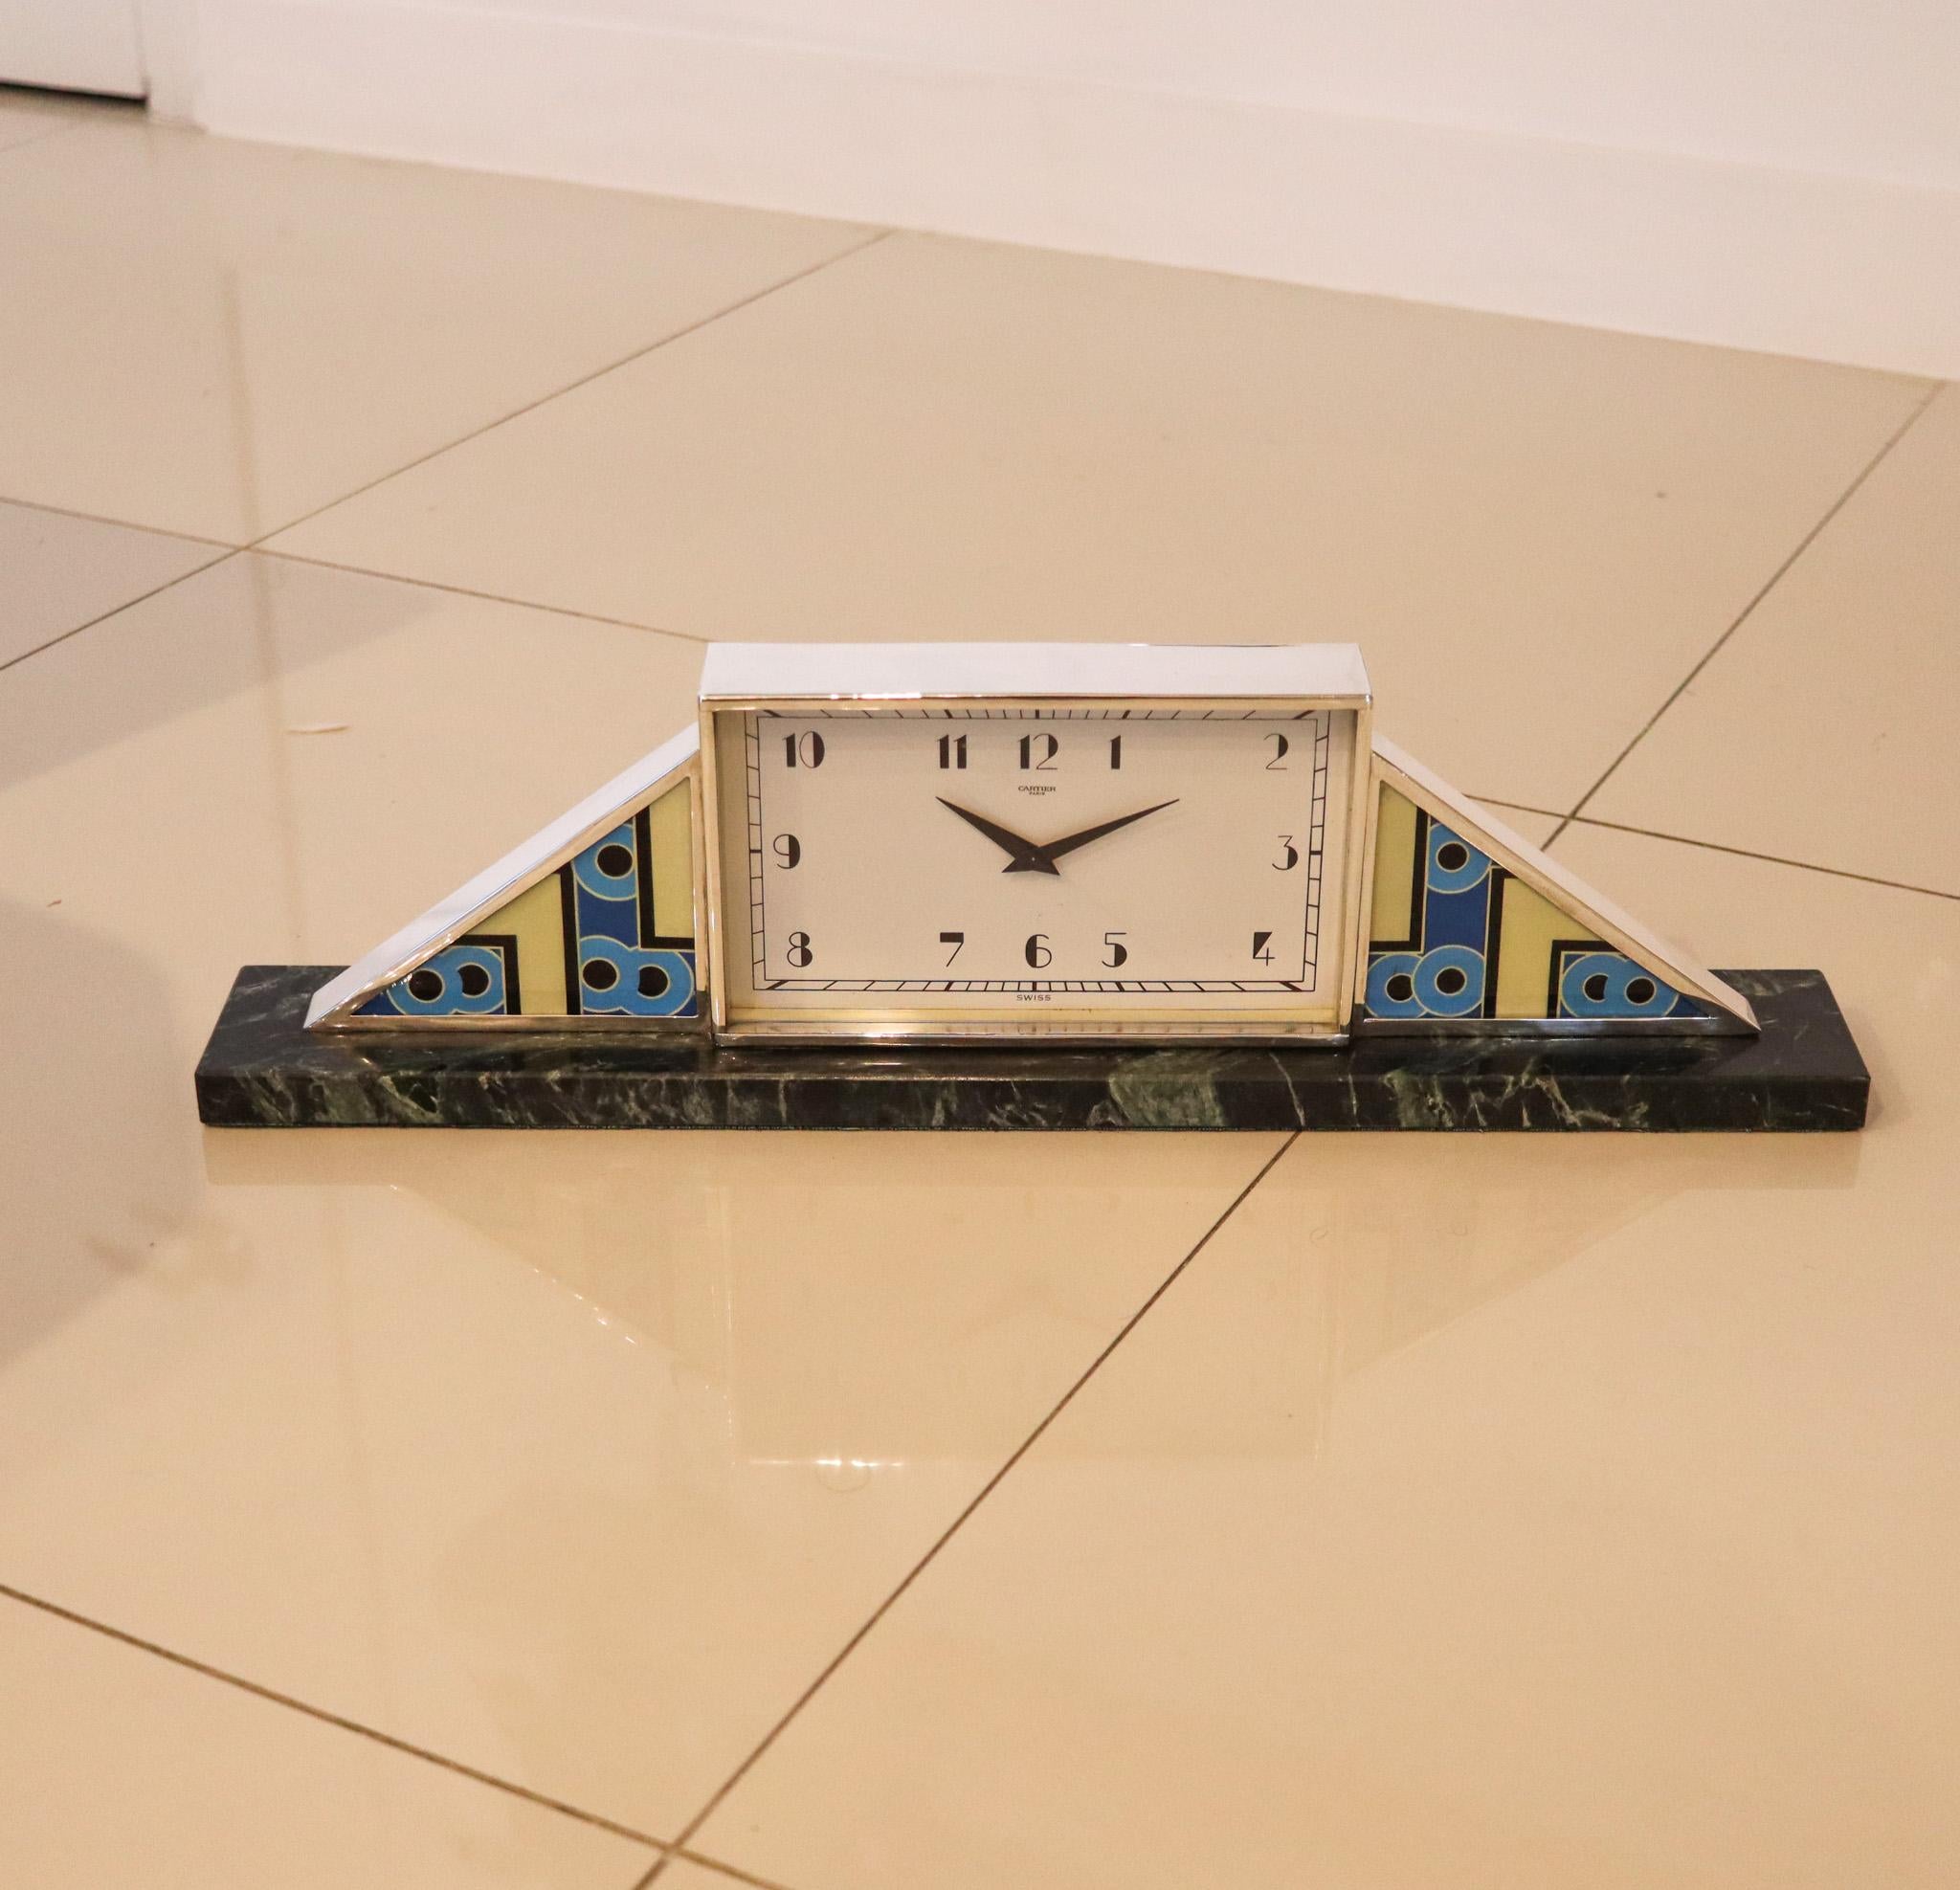 Geometric desk clock designed by Cartier.

This fabulous one of a kind desk table clock is an epitome of the French art deco design. Has been exceptionally designed in Paris by the luxury house of Cartier back in the 1930. This rare clock has been